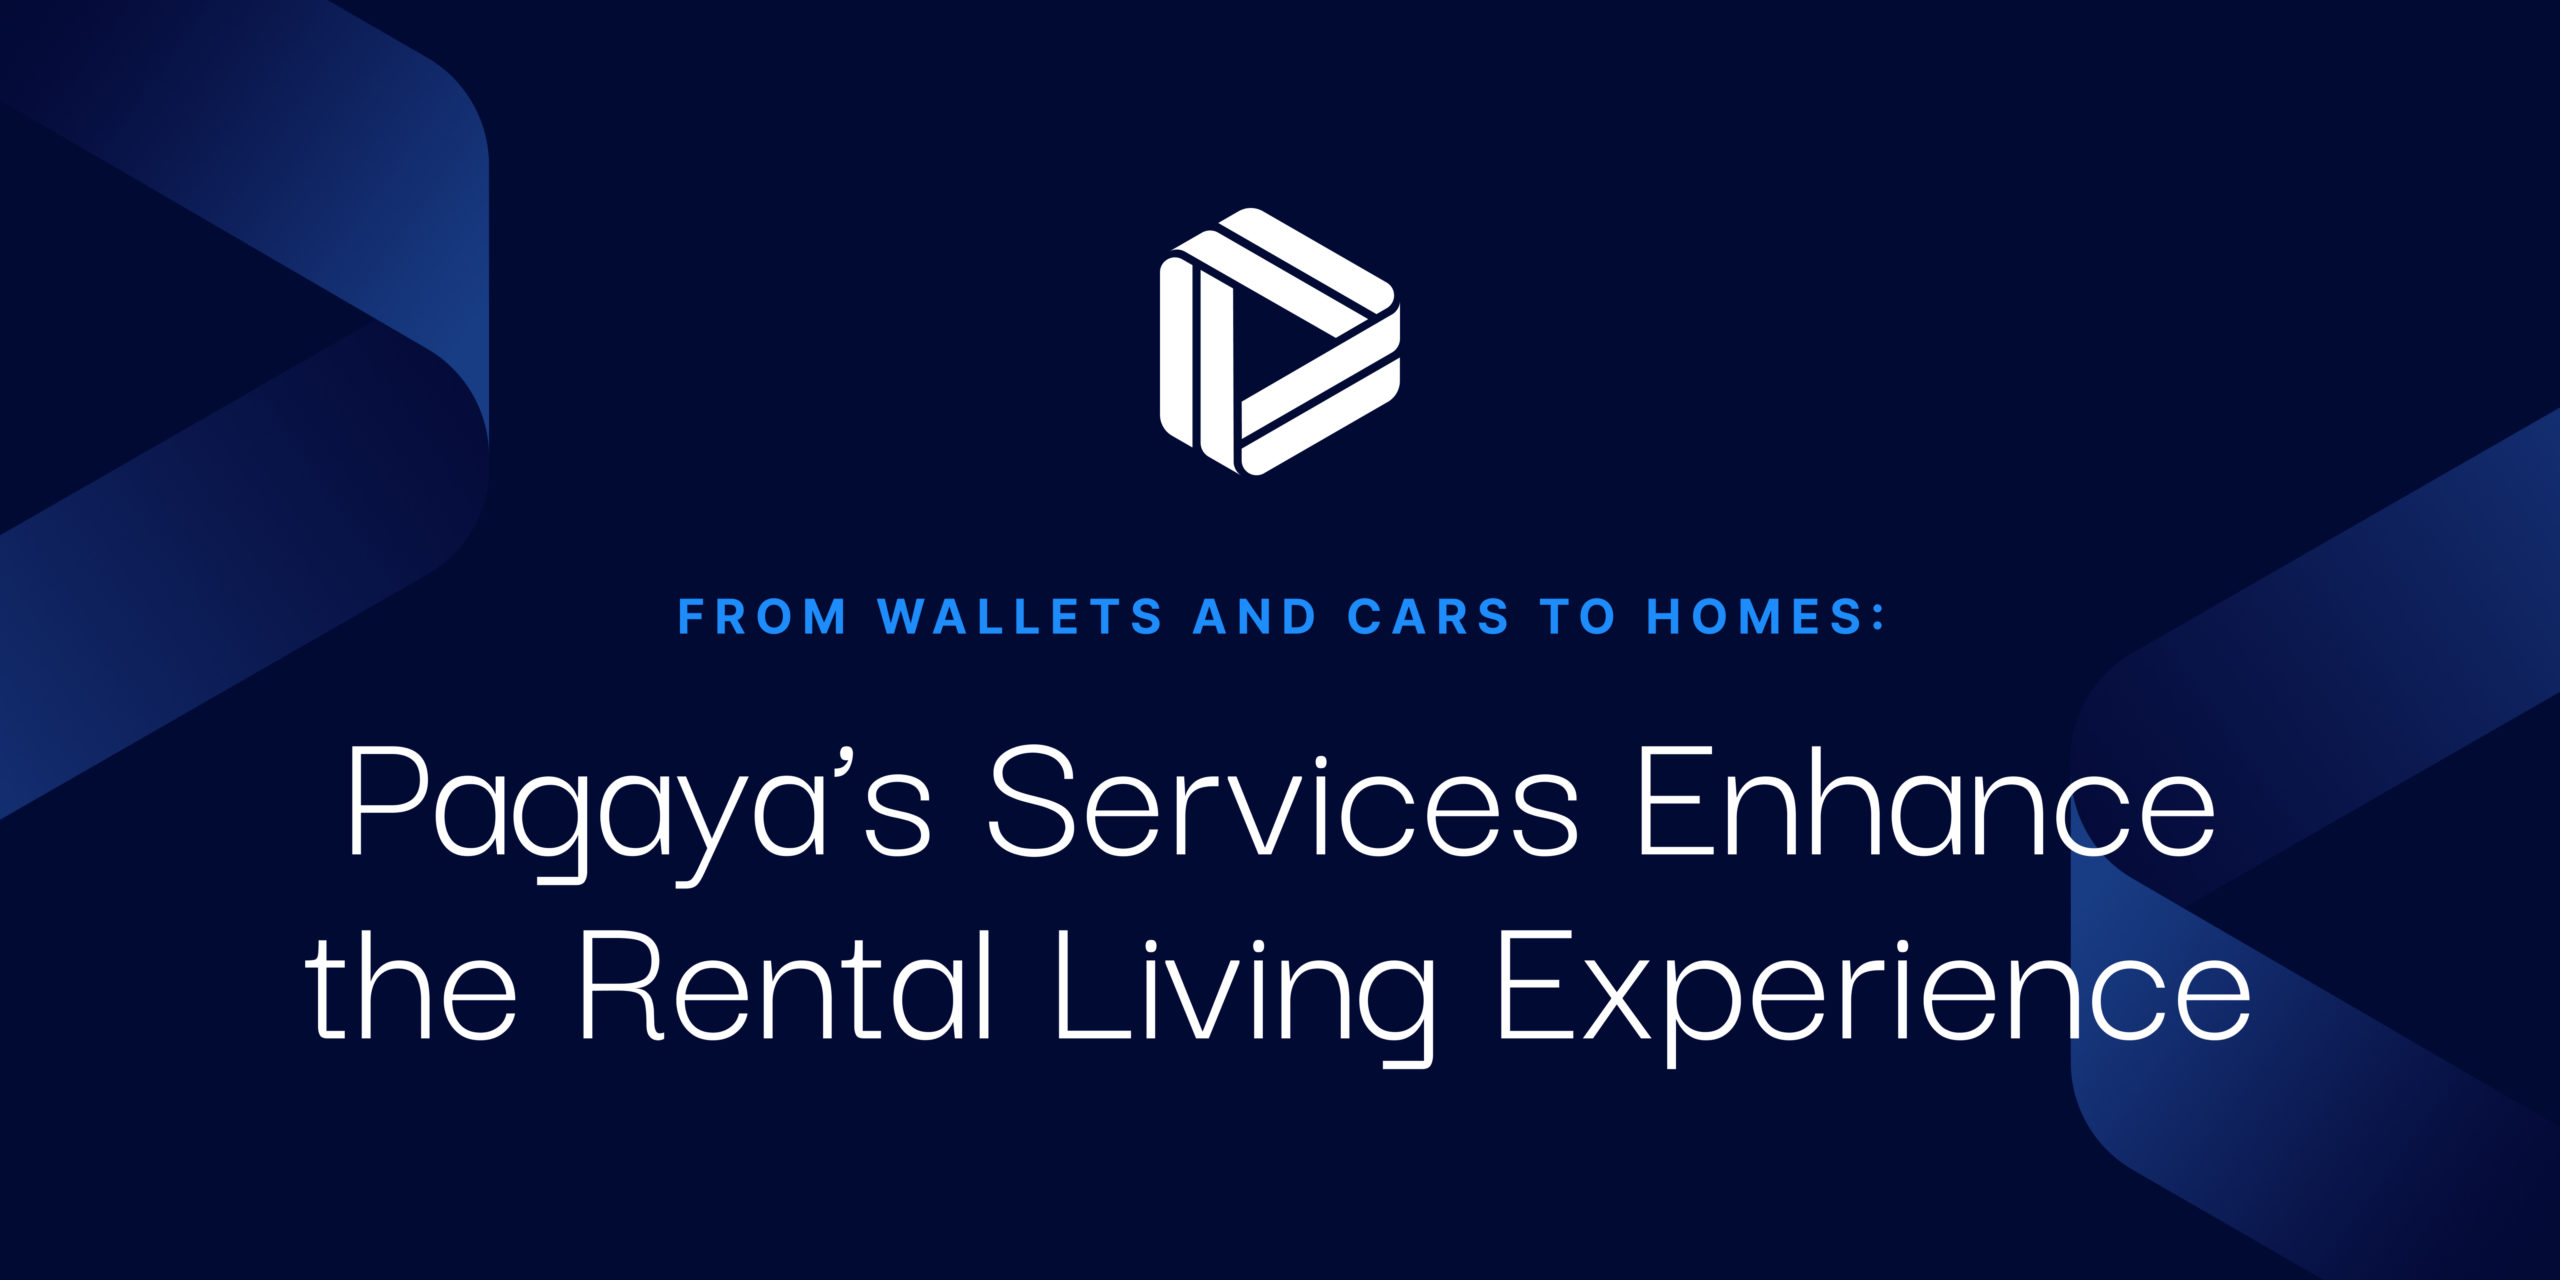 From Wallets and Cars to Homes: Pagaya’s Services Enhance the Rental Living Experience text on blue background with ribbons